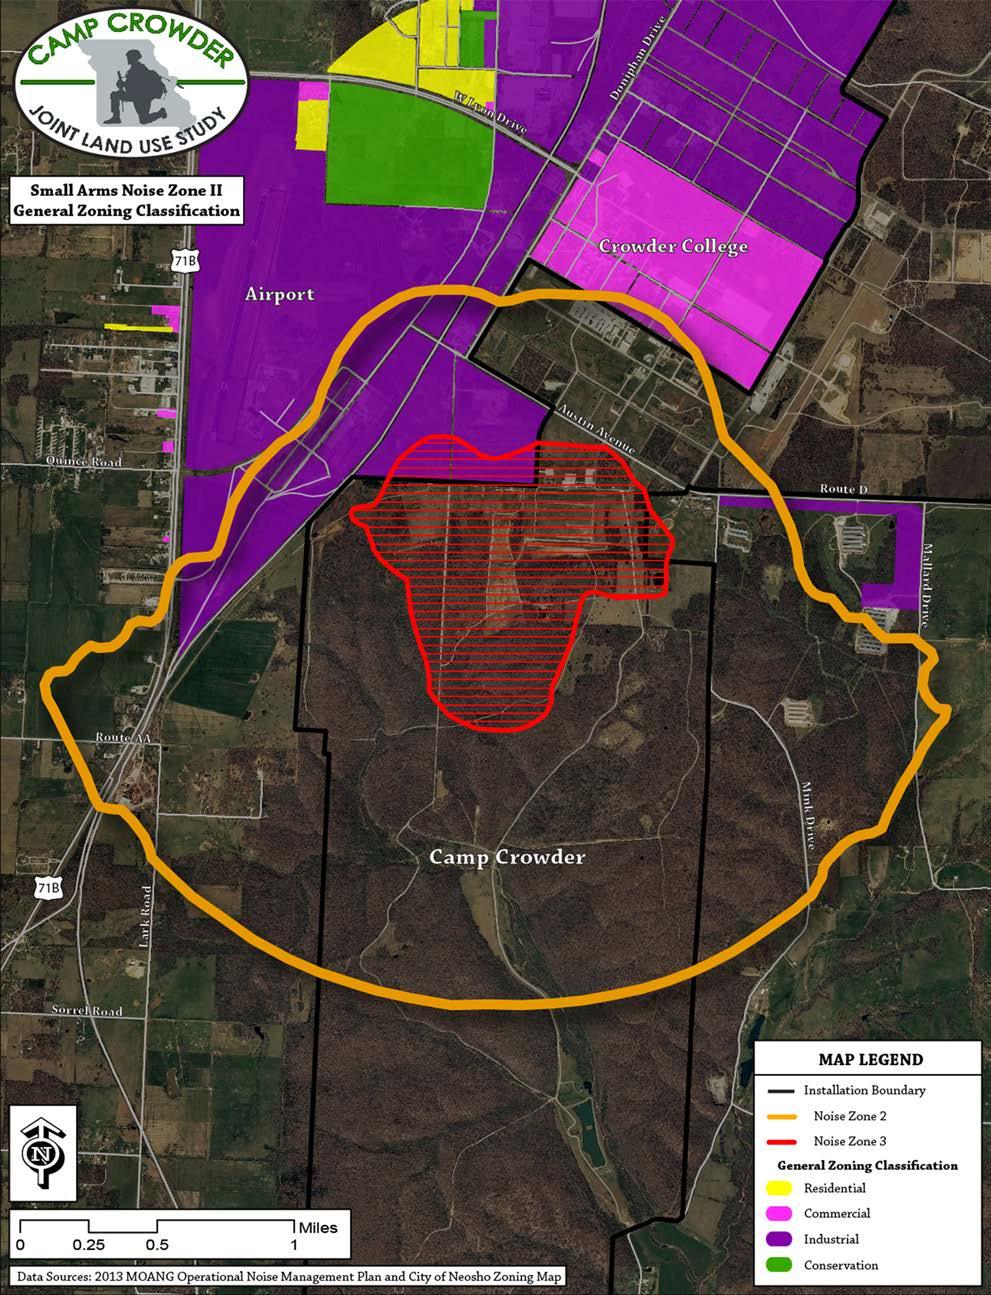 Figure 3-15: Small Arms Noise Zone II, General Zoning